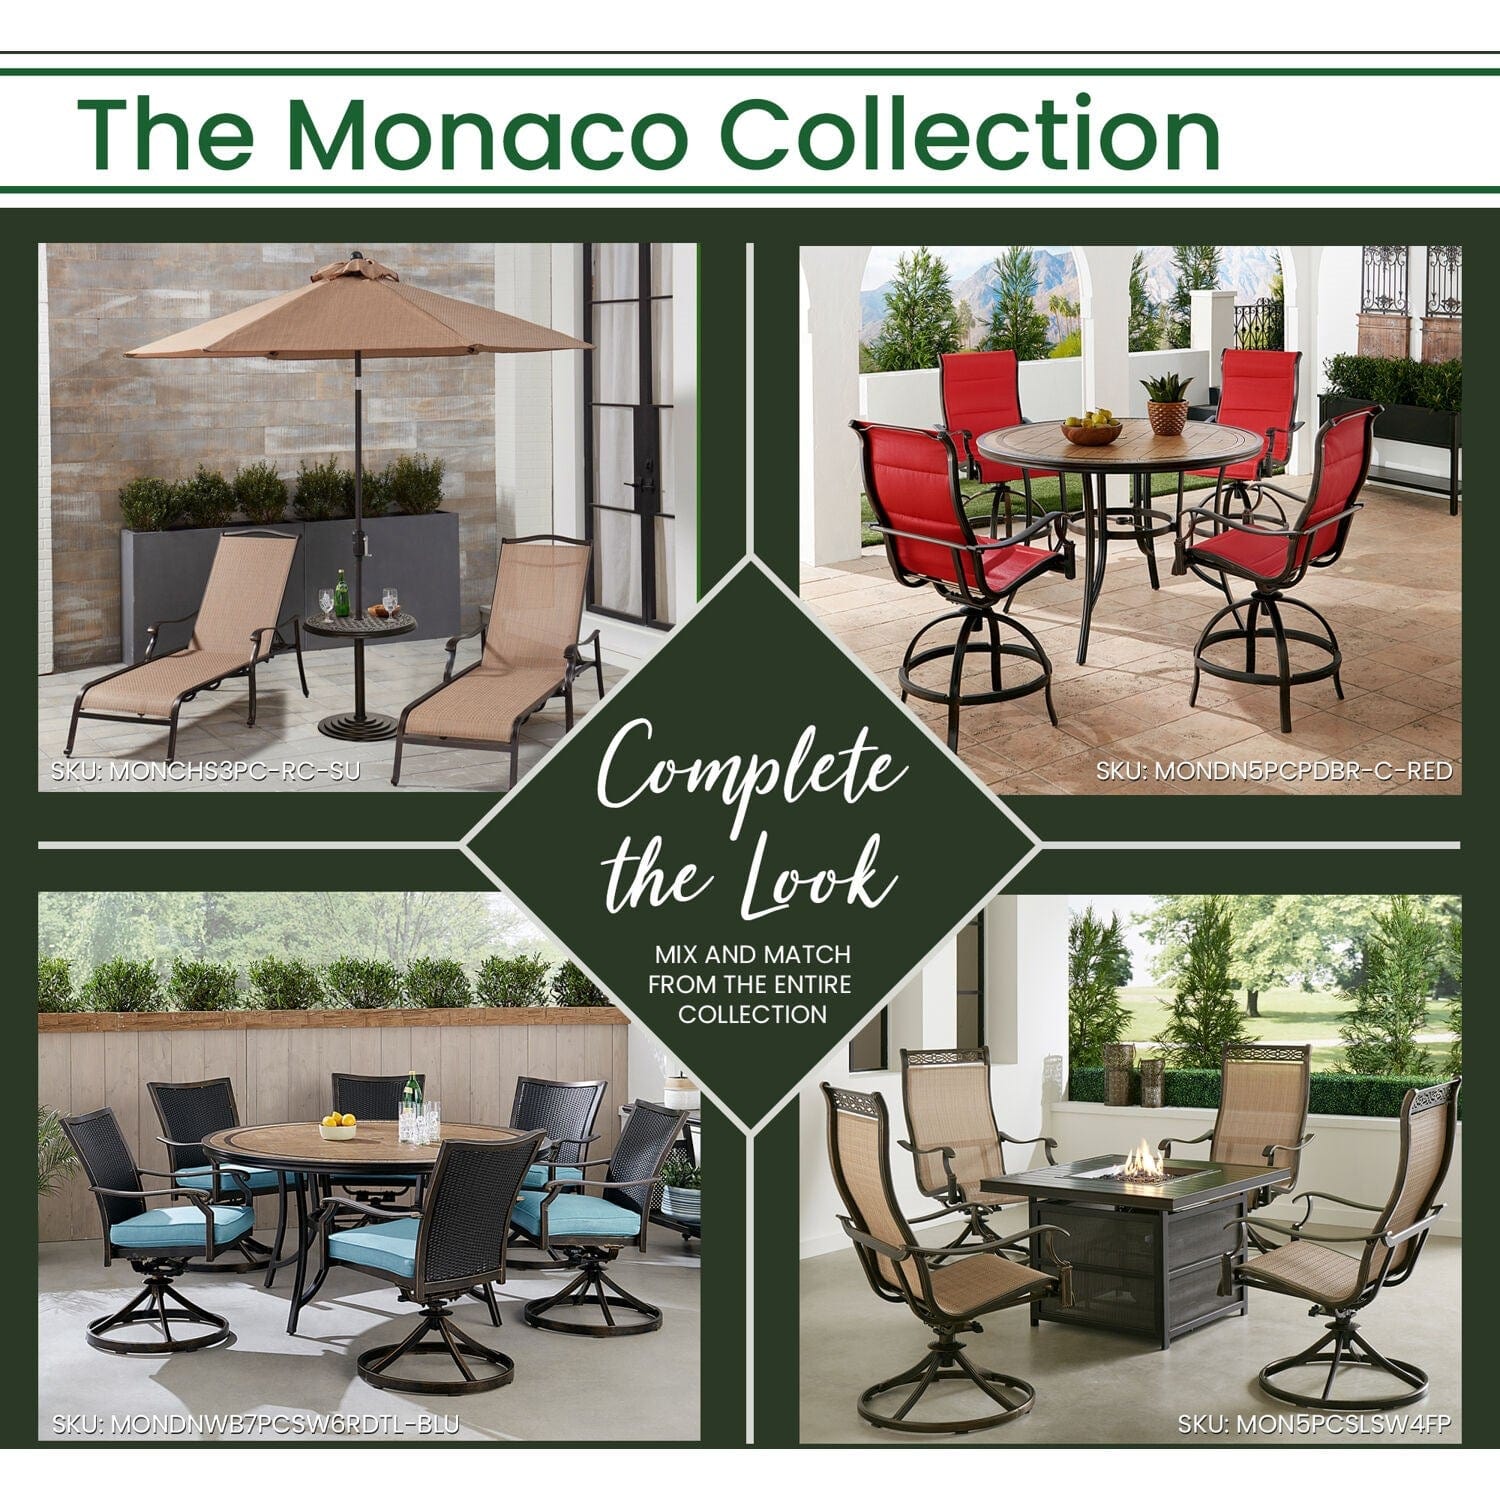 Hanover Outdoor Dining Set Hanover Monaco 7-Piece Dining Set in Blue with 6 Wicker Back Swivel Rockers, 60-in. Tile-Top Table and 9-Ft. Umbrella | MONDNWB7PCSW6RDTL-SU-B